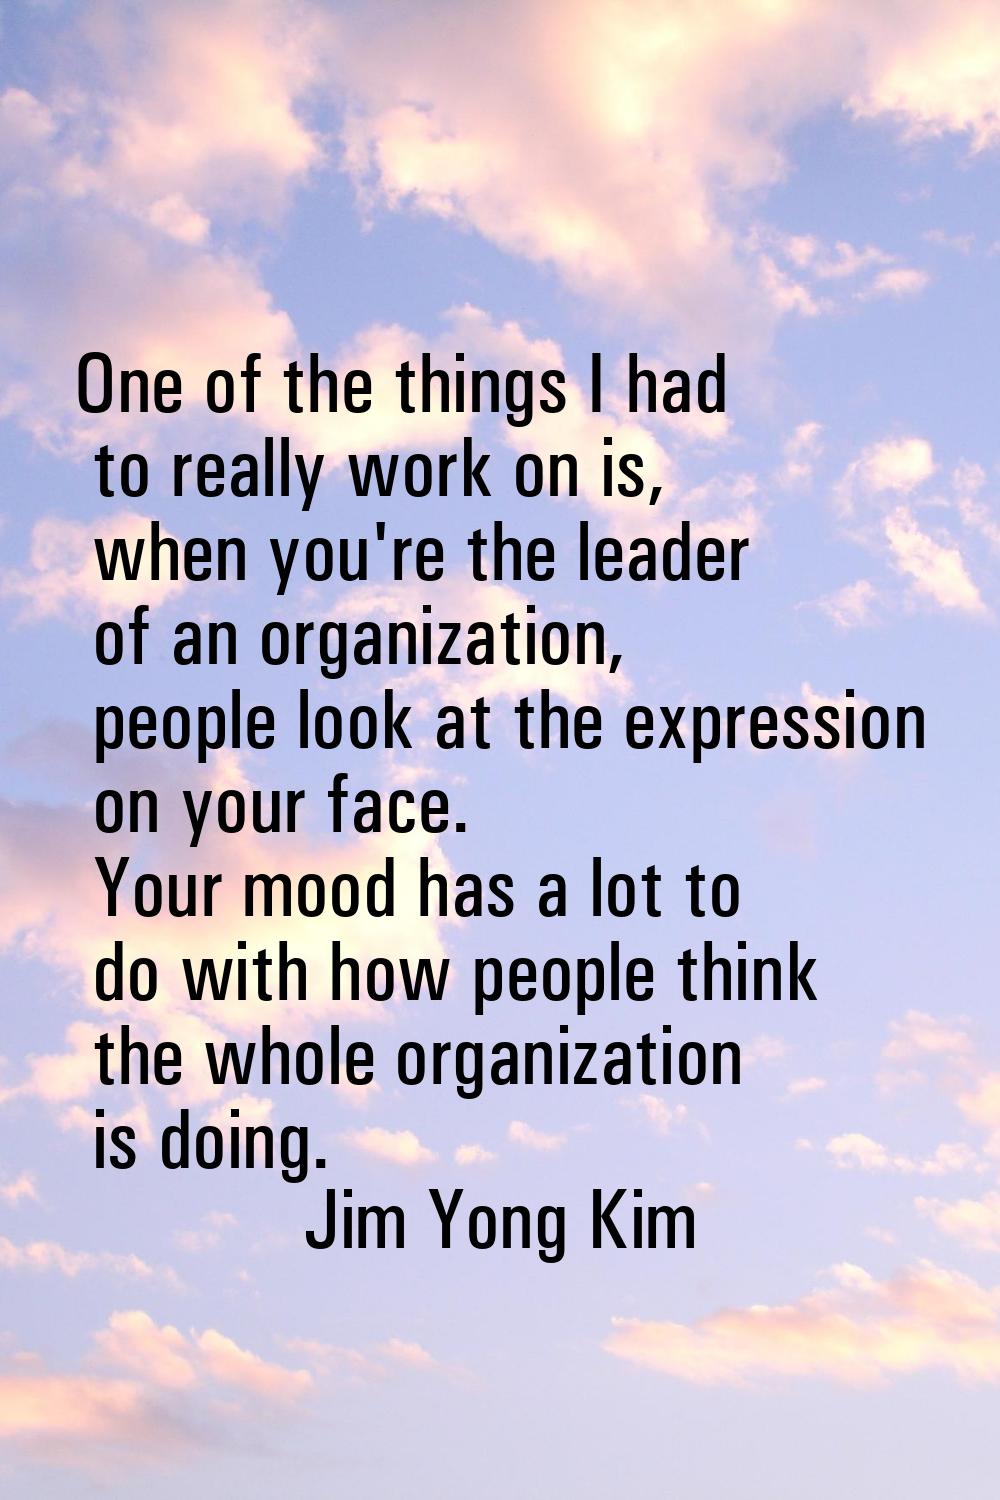 One of the things I had to really work on is, when you're the leader of an organization, people loo